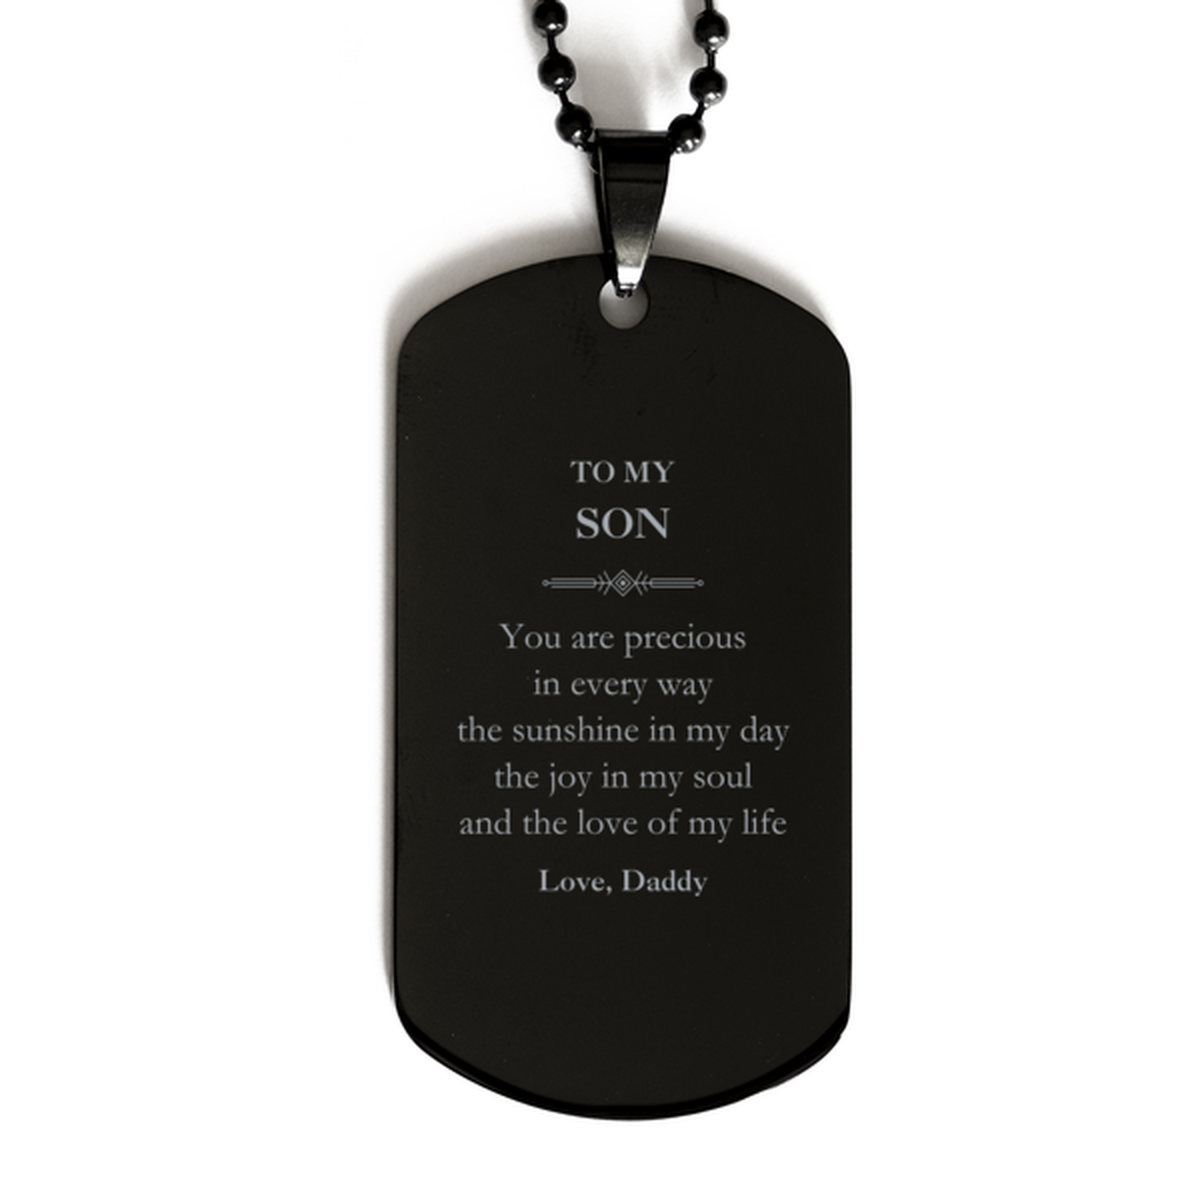 Graduation Gifts for Son Black Dog Tag Present from Daddy, Christmas Son Birthday Gifts Son You are precious in every way the sunshine in my day. Love, Daddy